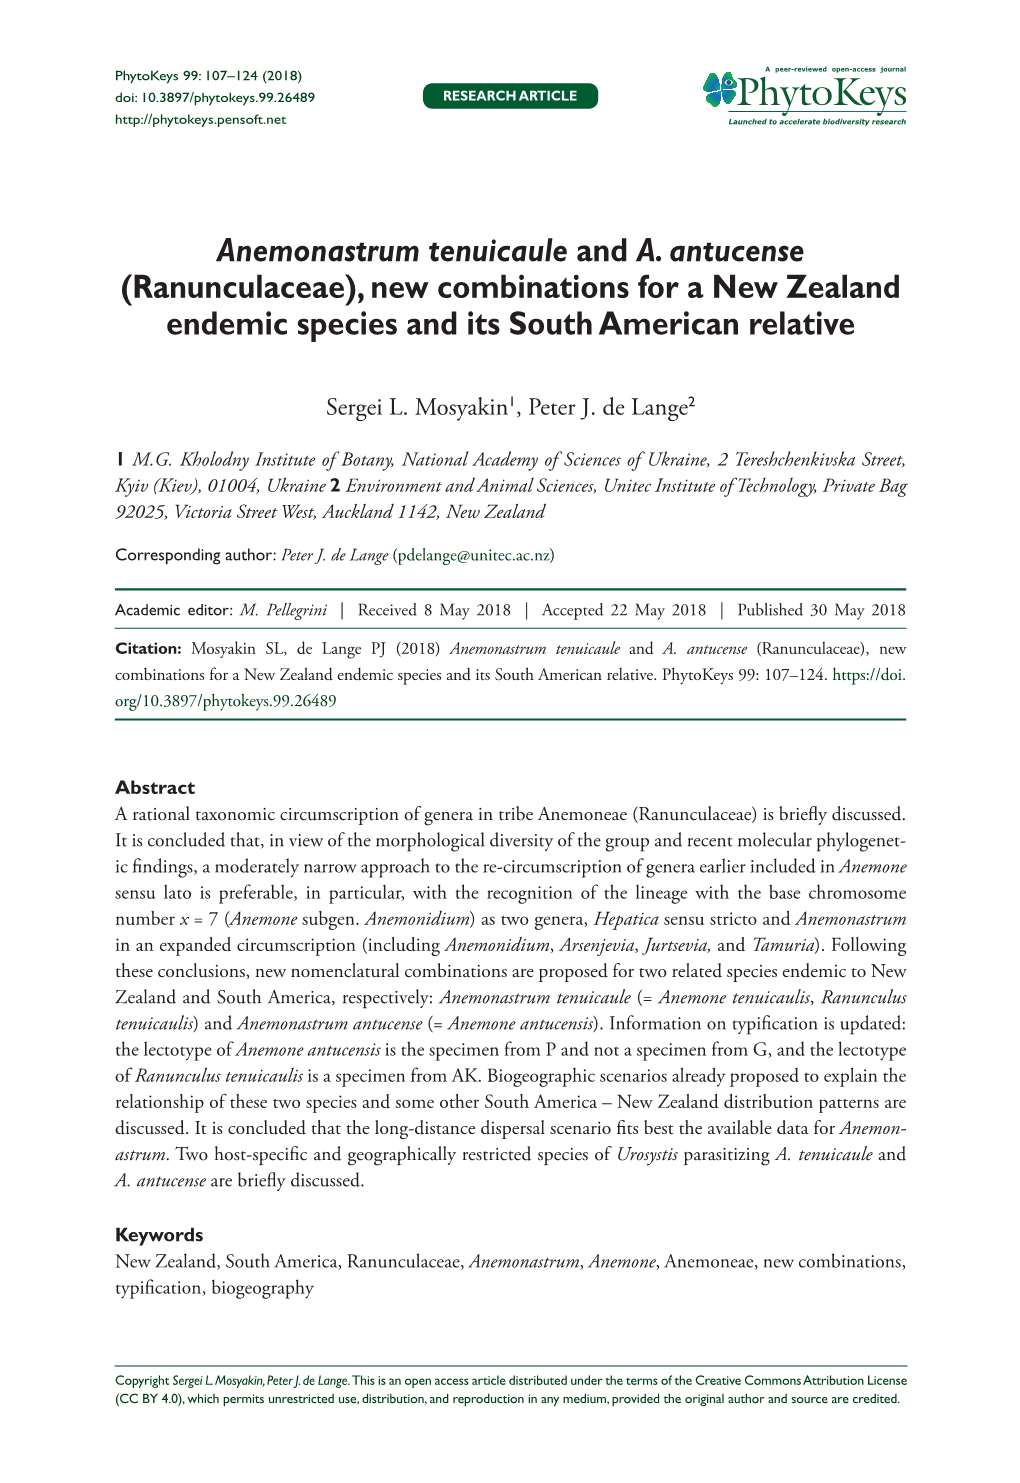 Anemonastrum Tenuicaule and A. Antucense (Ranunculaceae), New Combinations for a New Zealand Endemic Species and Its South American Relative